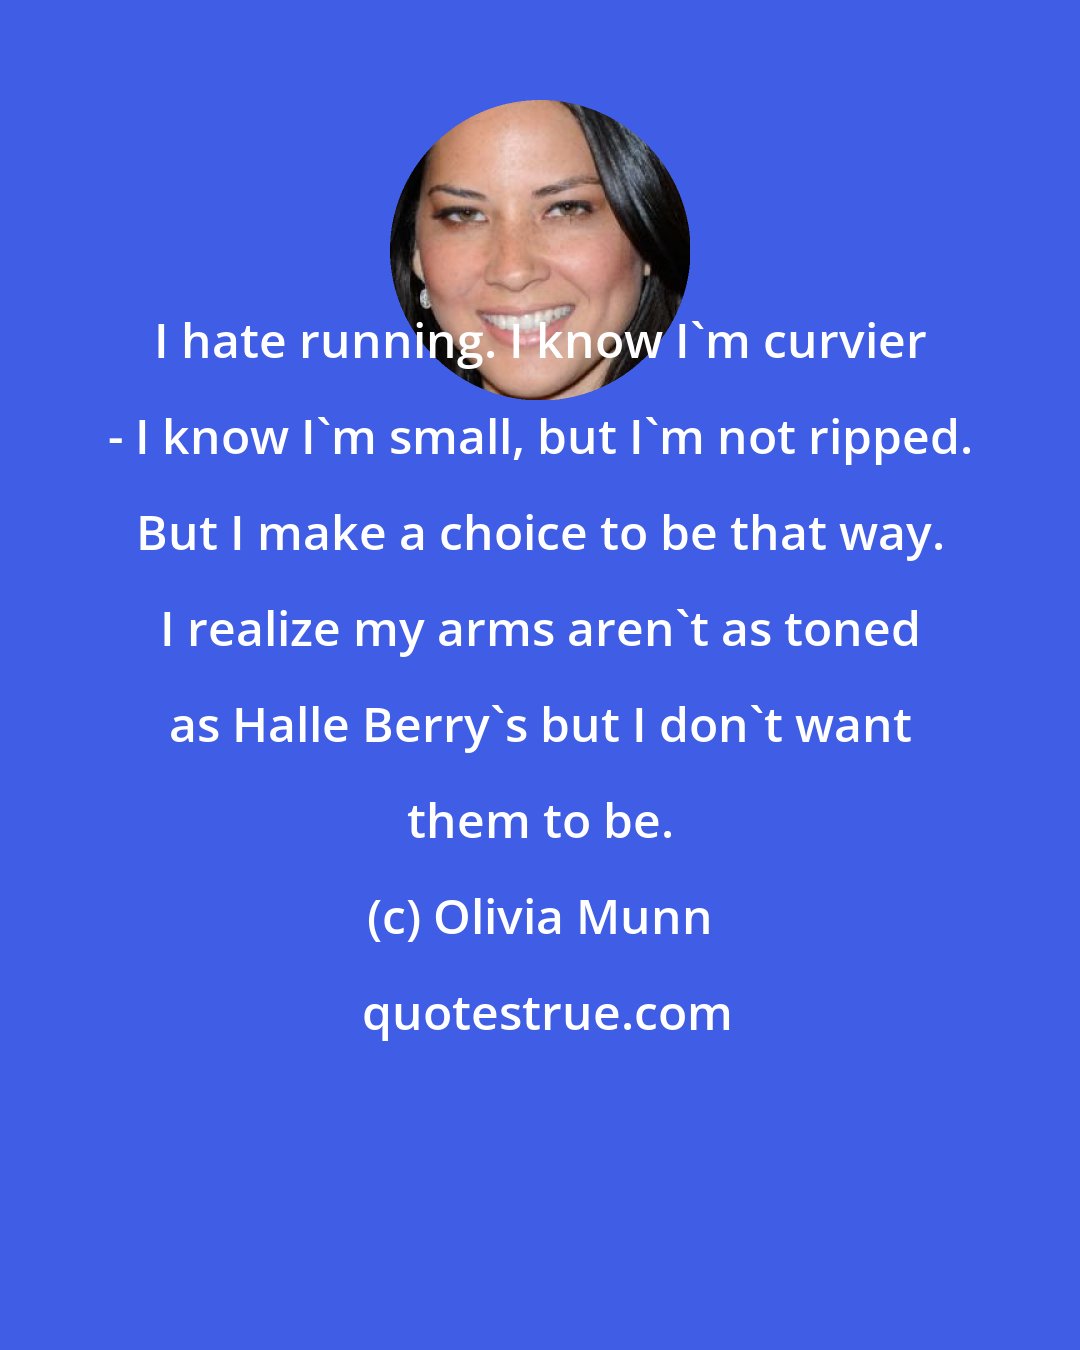 Olivia Munn: I hate running. I know I'm curvier - I know I'm small, but I'm not ripped. But I make a choice to be that way. I realize my arms aren't as toned as Halle Berry's but I don't want them to be.